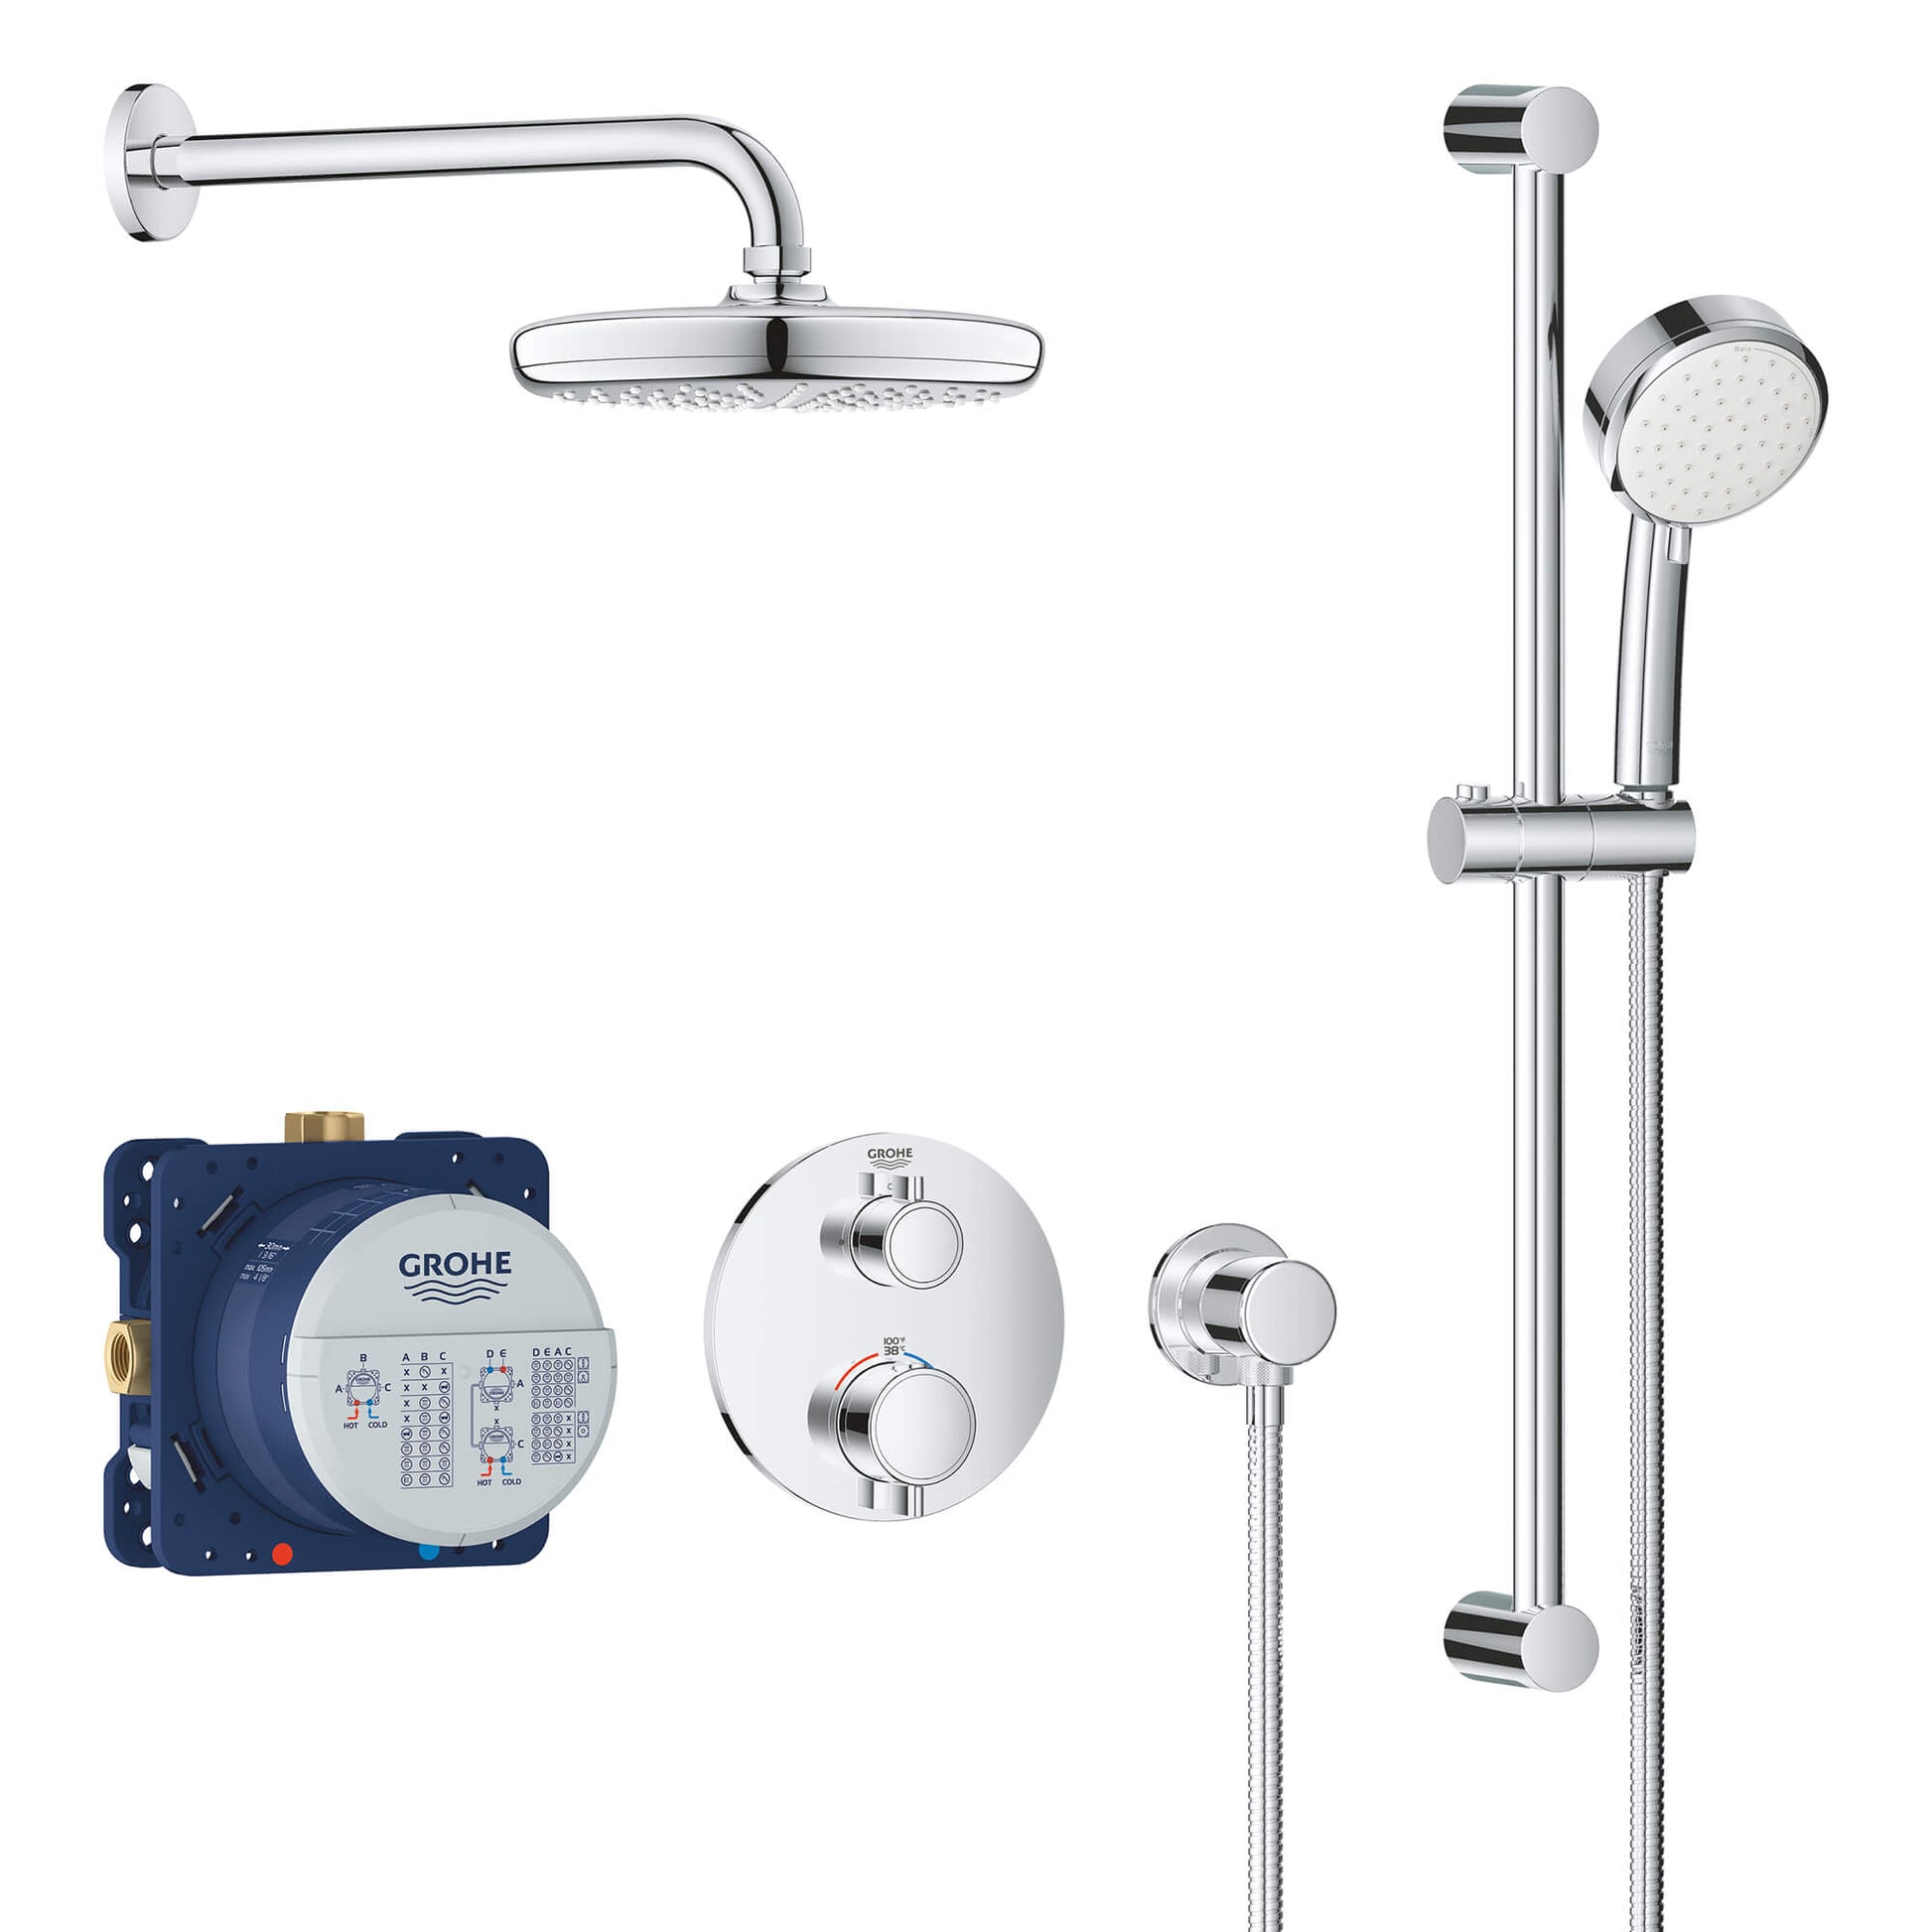 GROHE 34745000 Grohtherm Chrome Shower Set. 1.75gpm